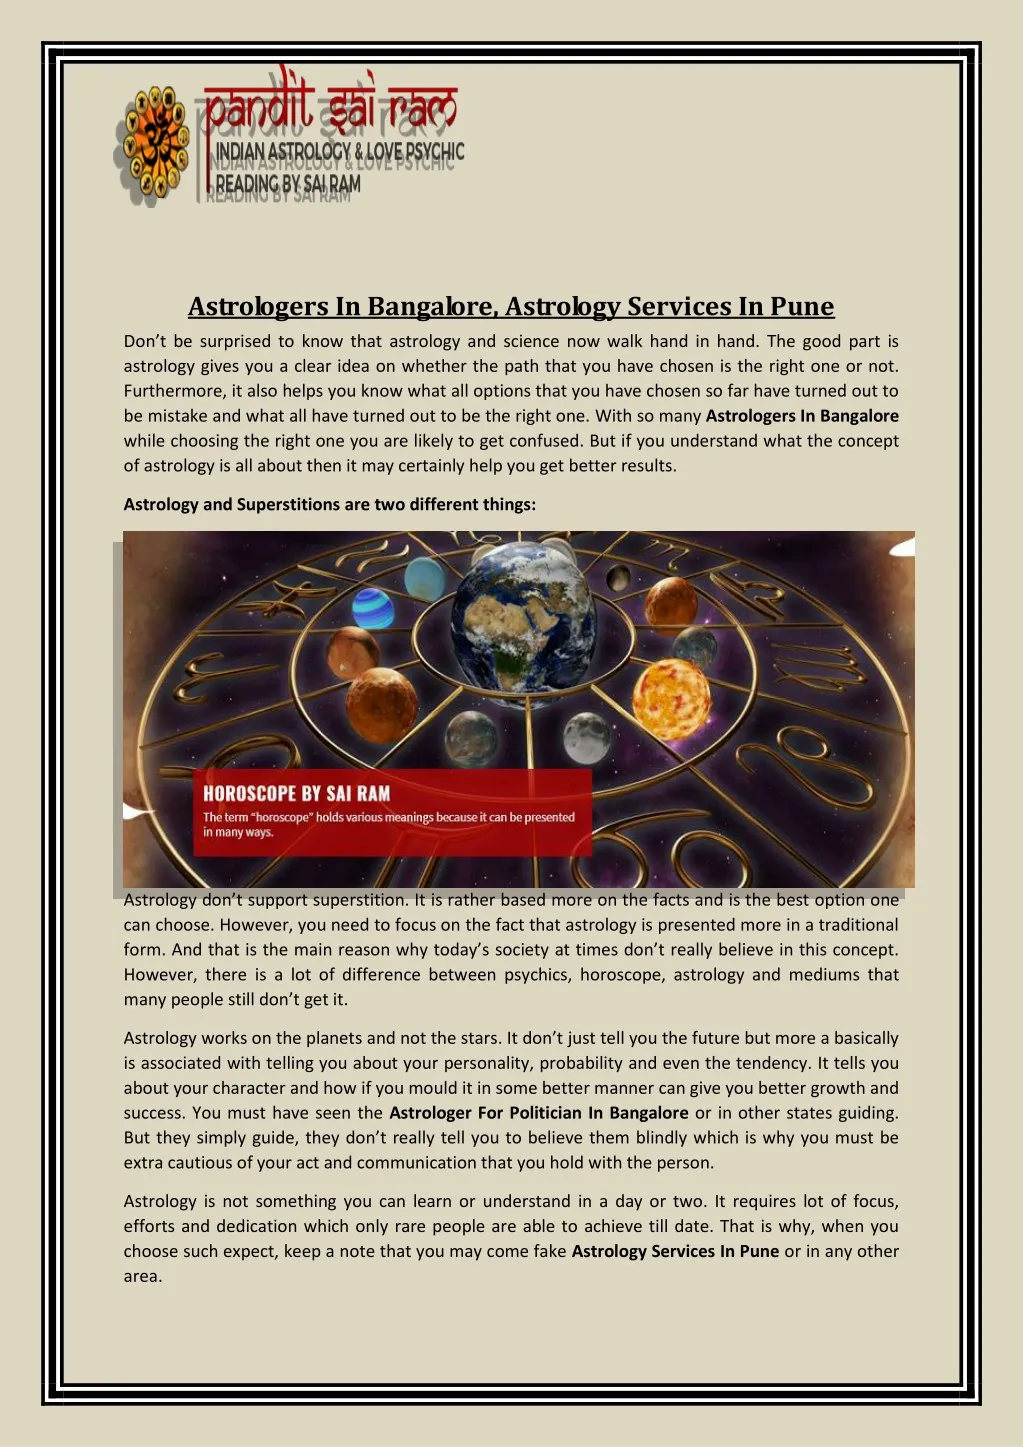 astrologers in bangalore astrology services